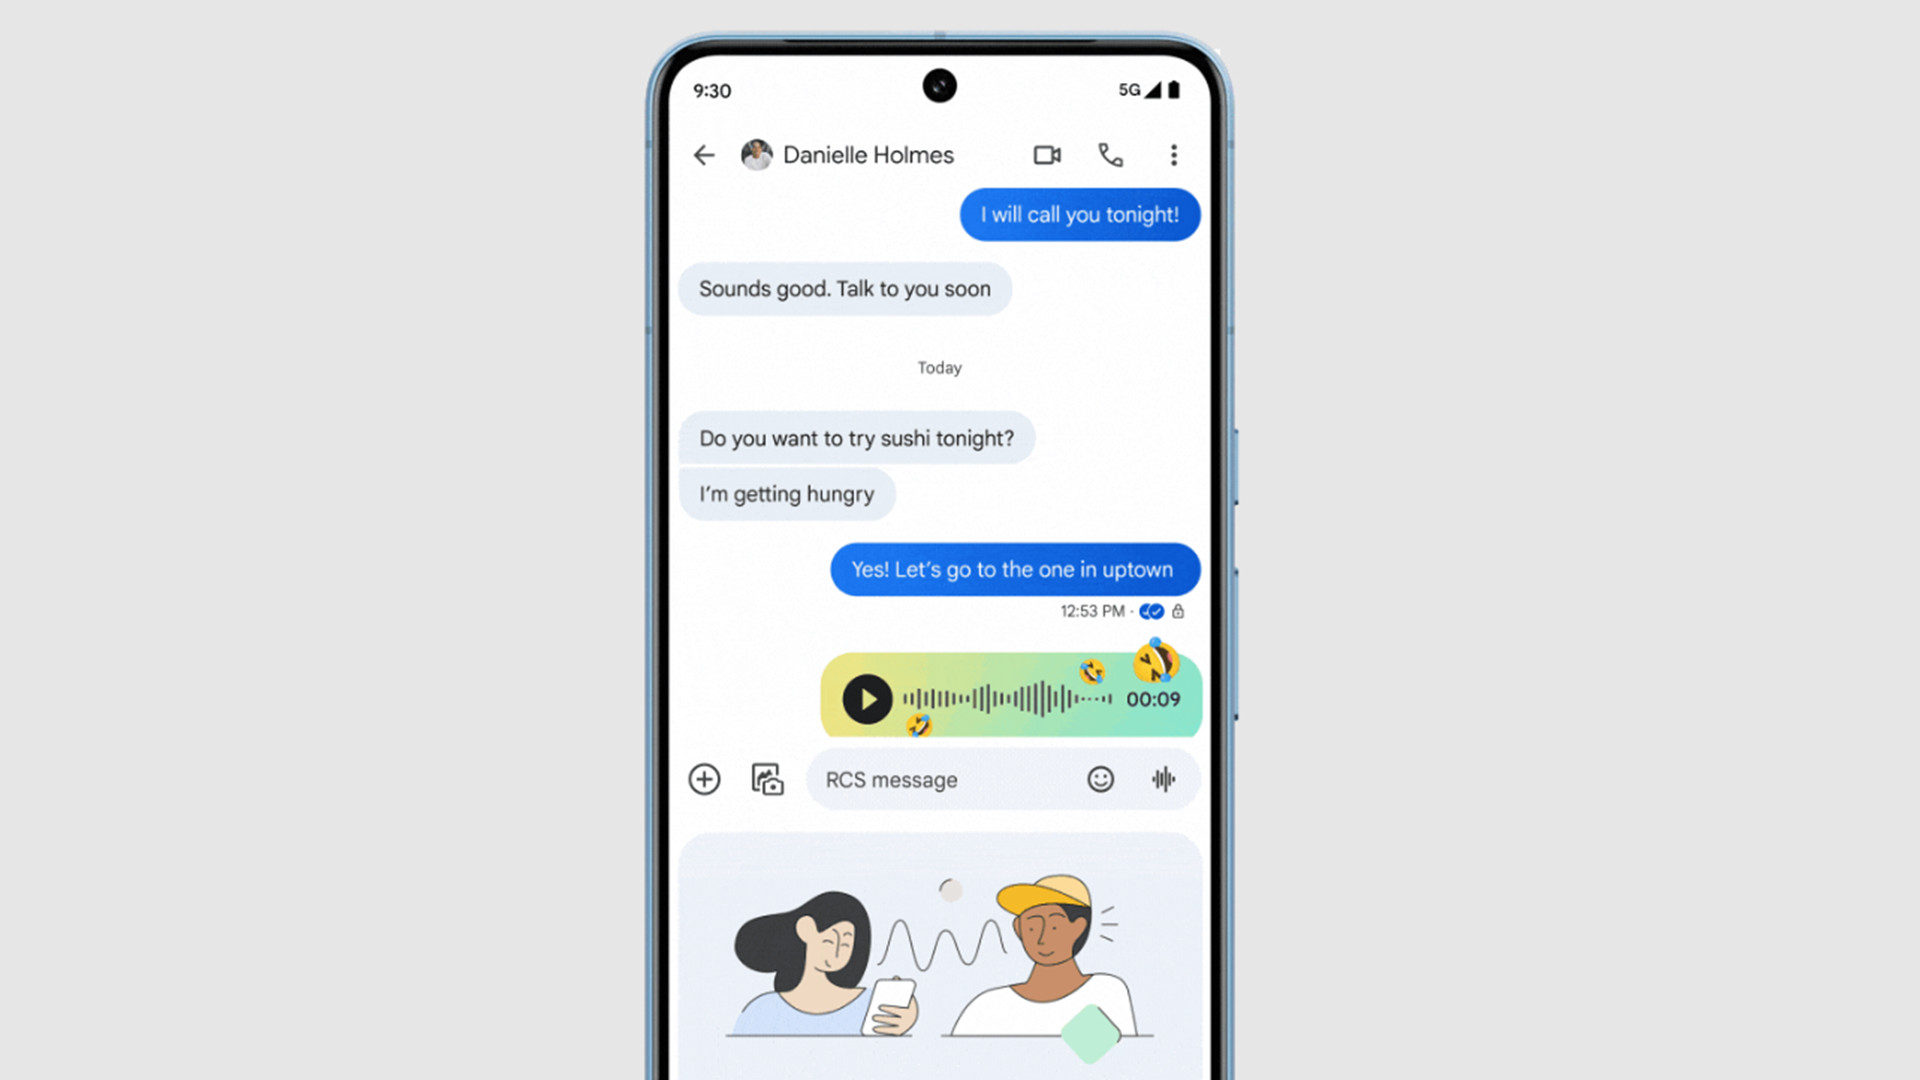 Google Messages' new Voice Mood